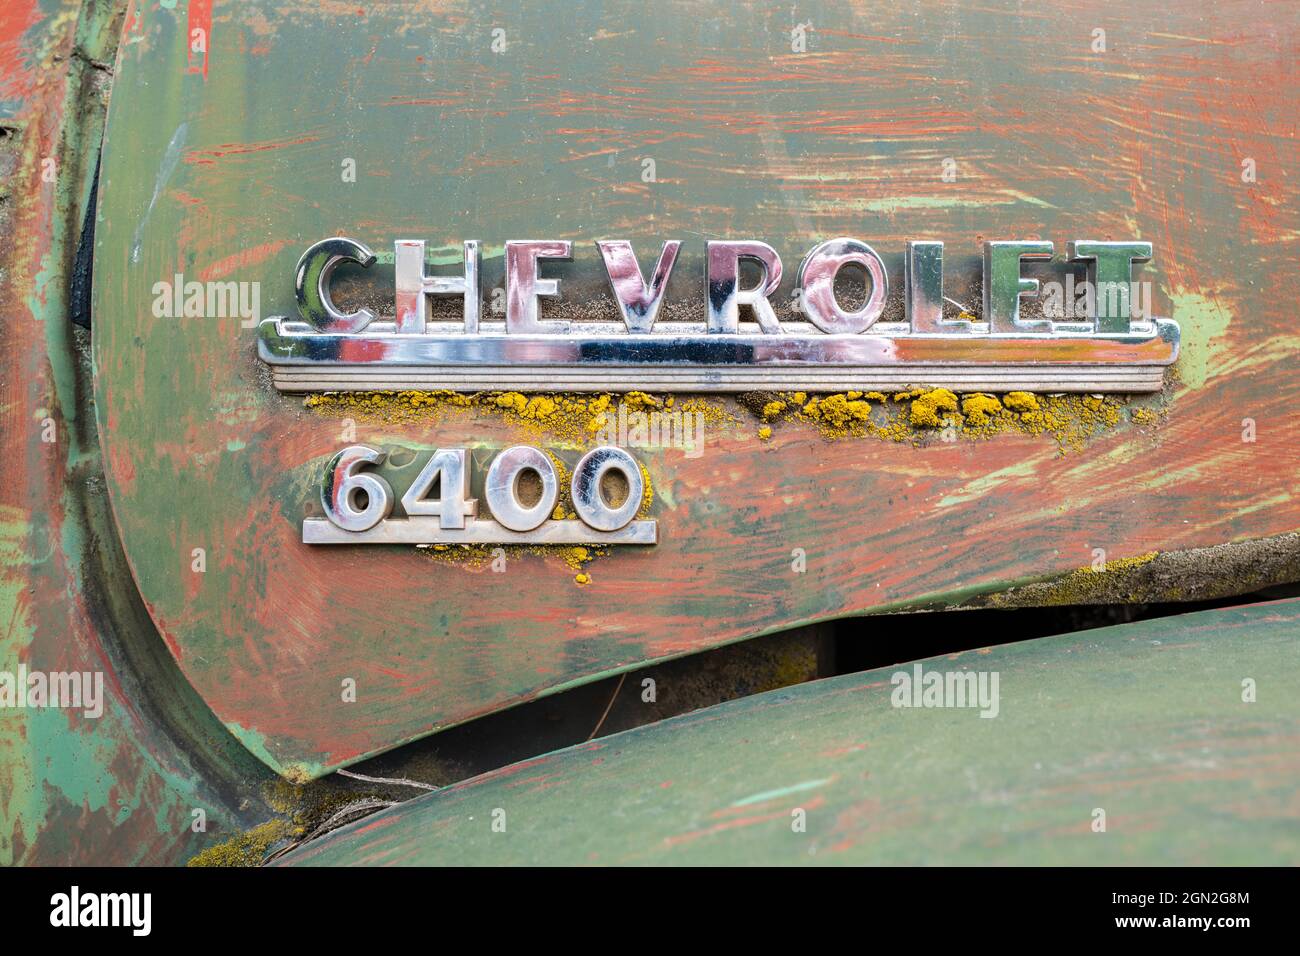 Chrome nameplate on the side of a 1951 Chevy 6400 truck in Idaho, USA Stock Photo